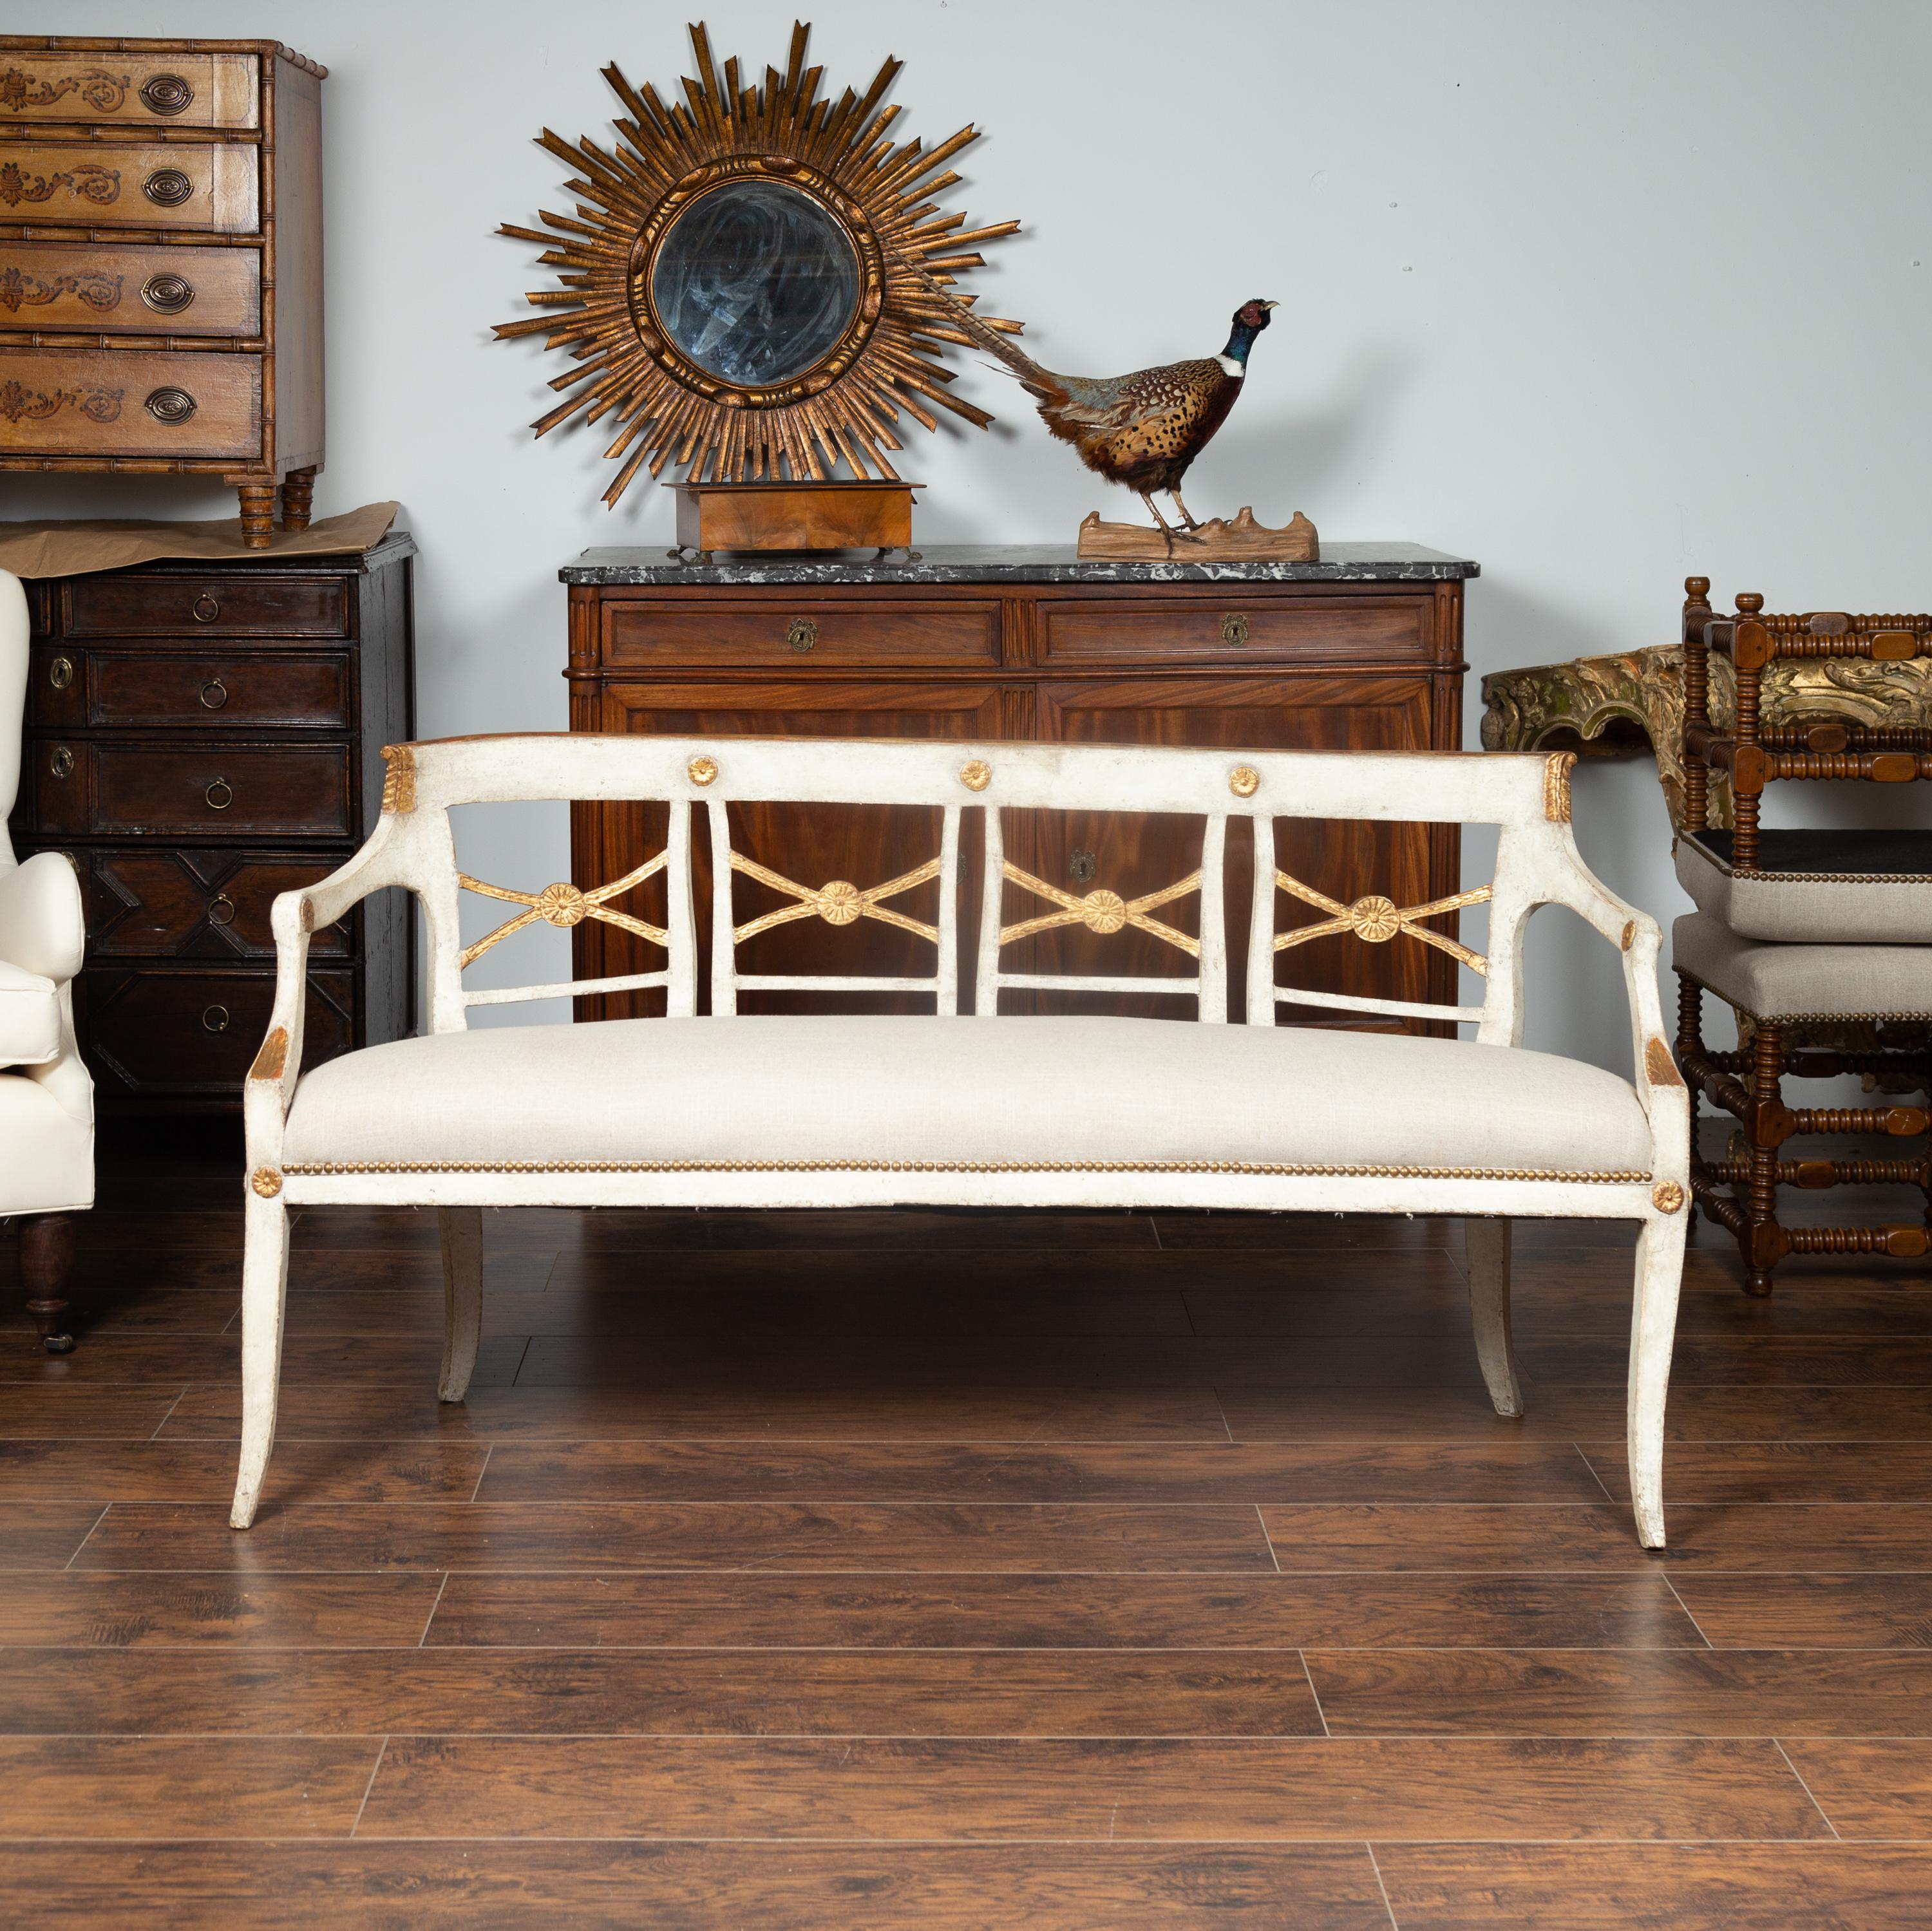 Italian 1860s Painted Wood Bench with Gilded Accents and New Upholstery For Sale 9